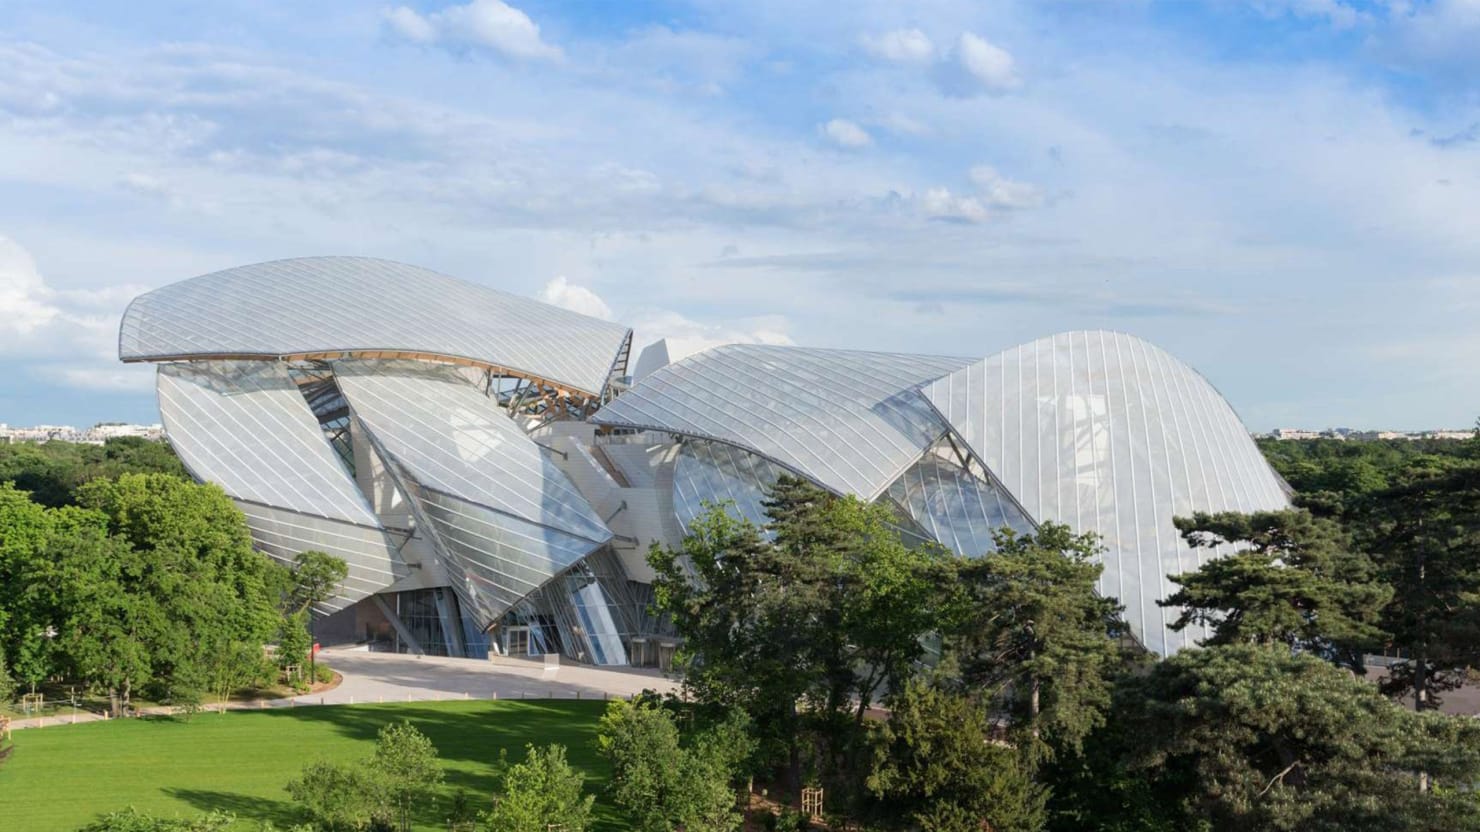 Frank Gehry Is Architecture’s Mad Genius